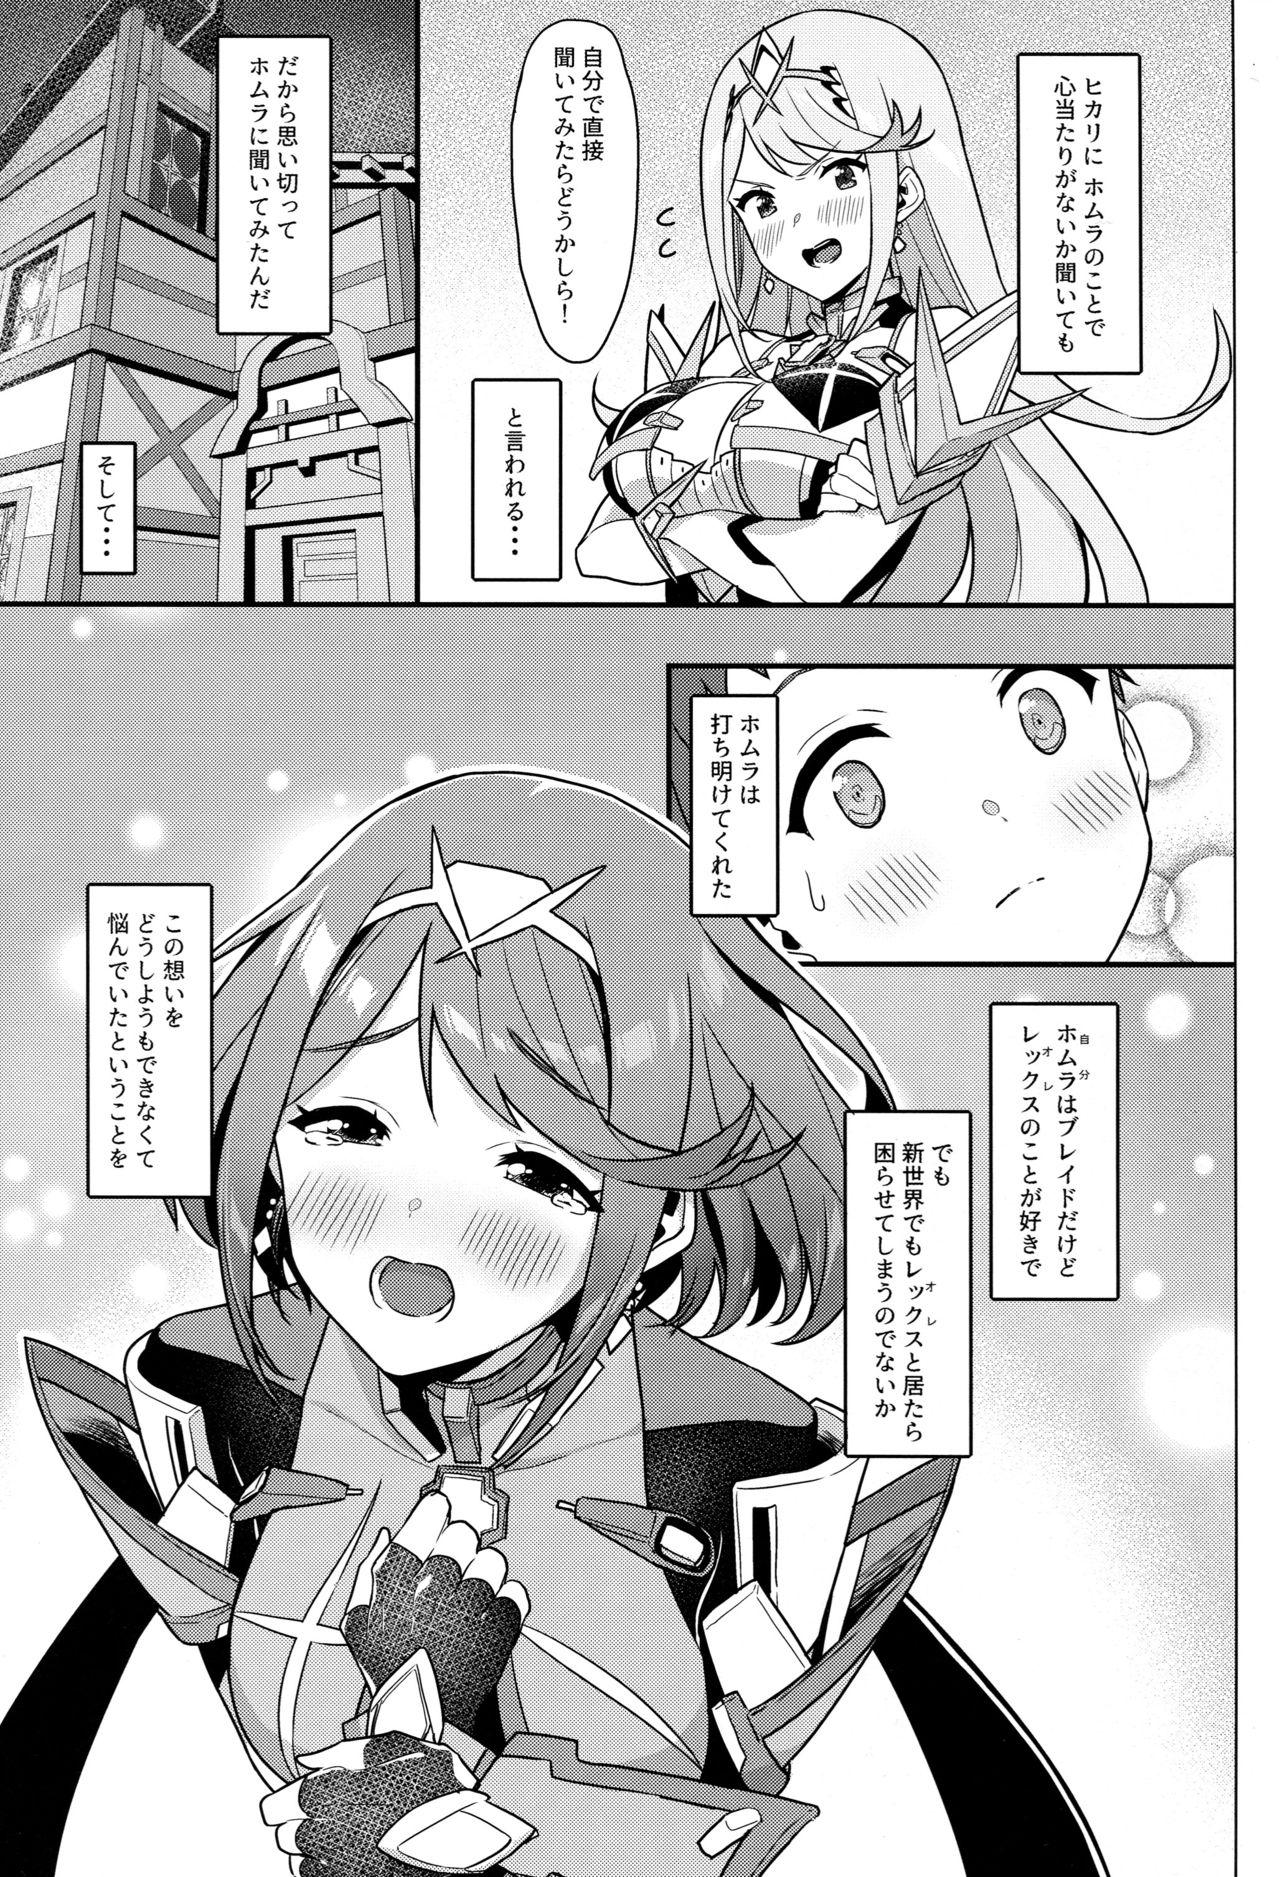 Watersports Chouyou no Naka e to - Xenoblade chronicles 2 Francaise - Page 4